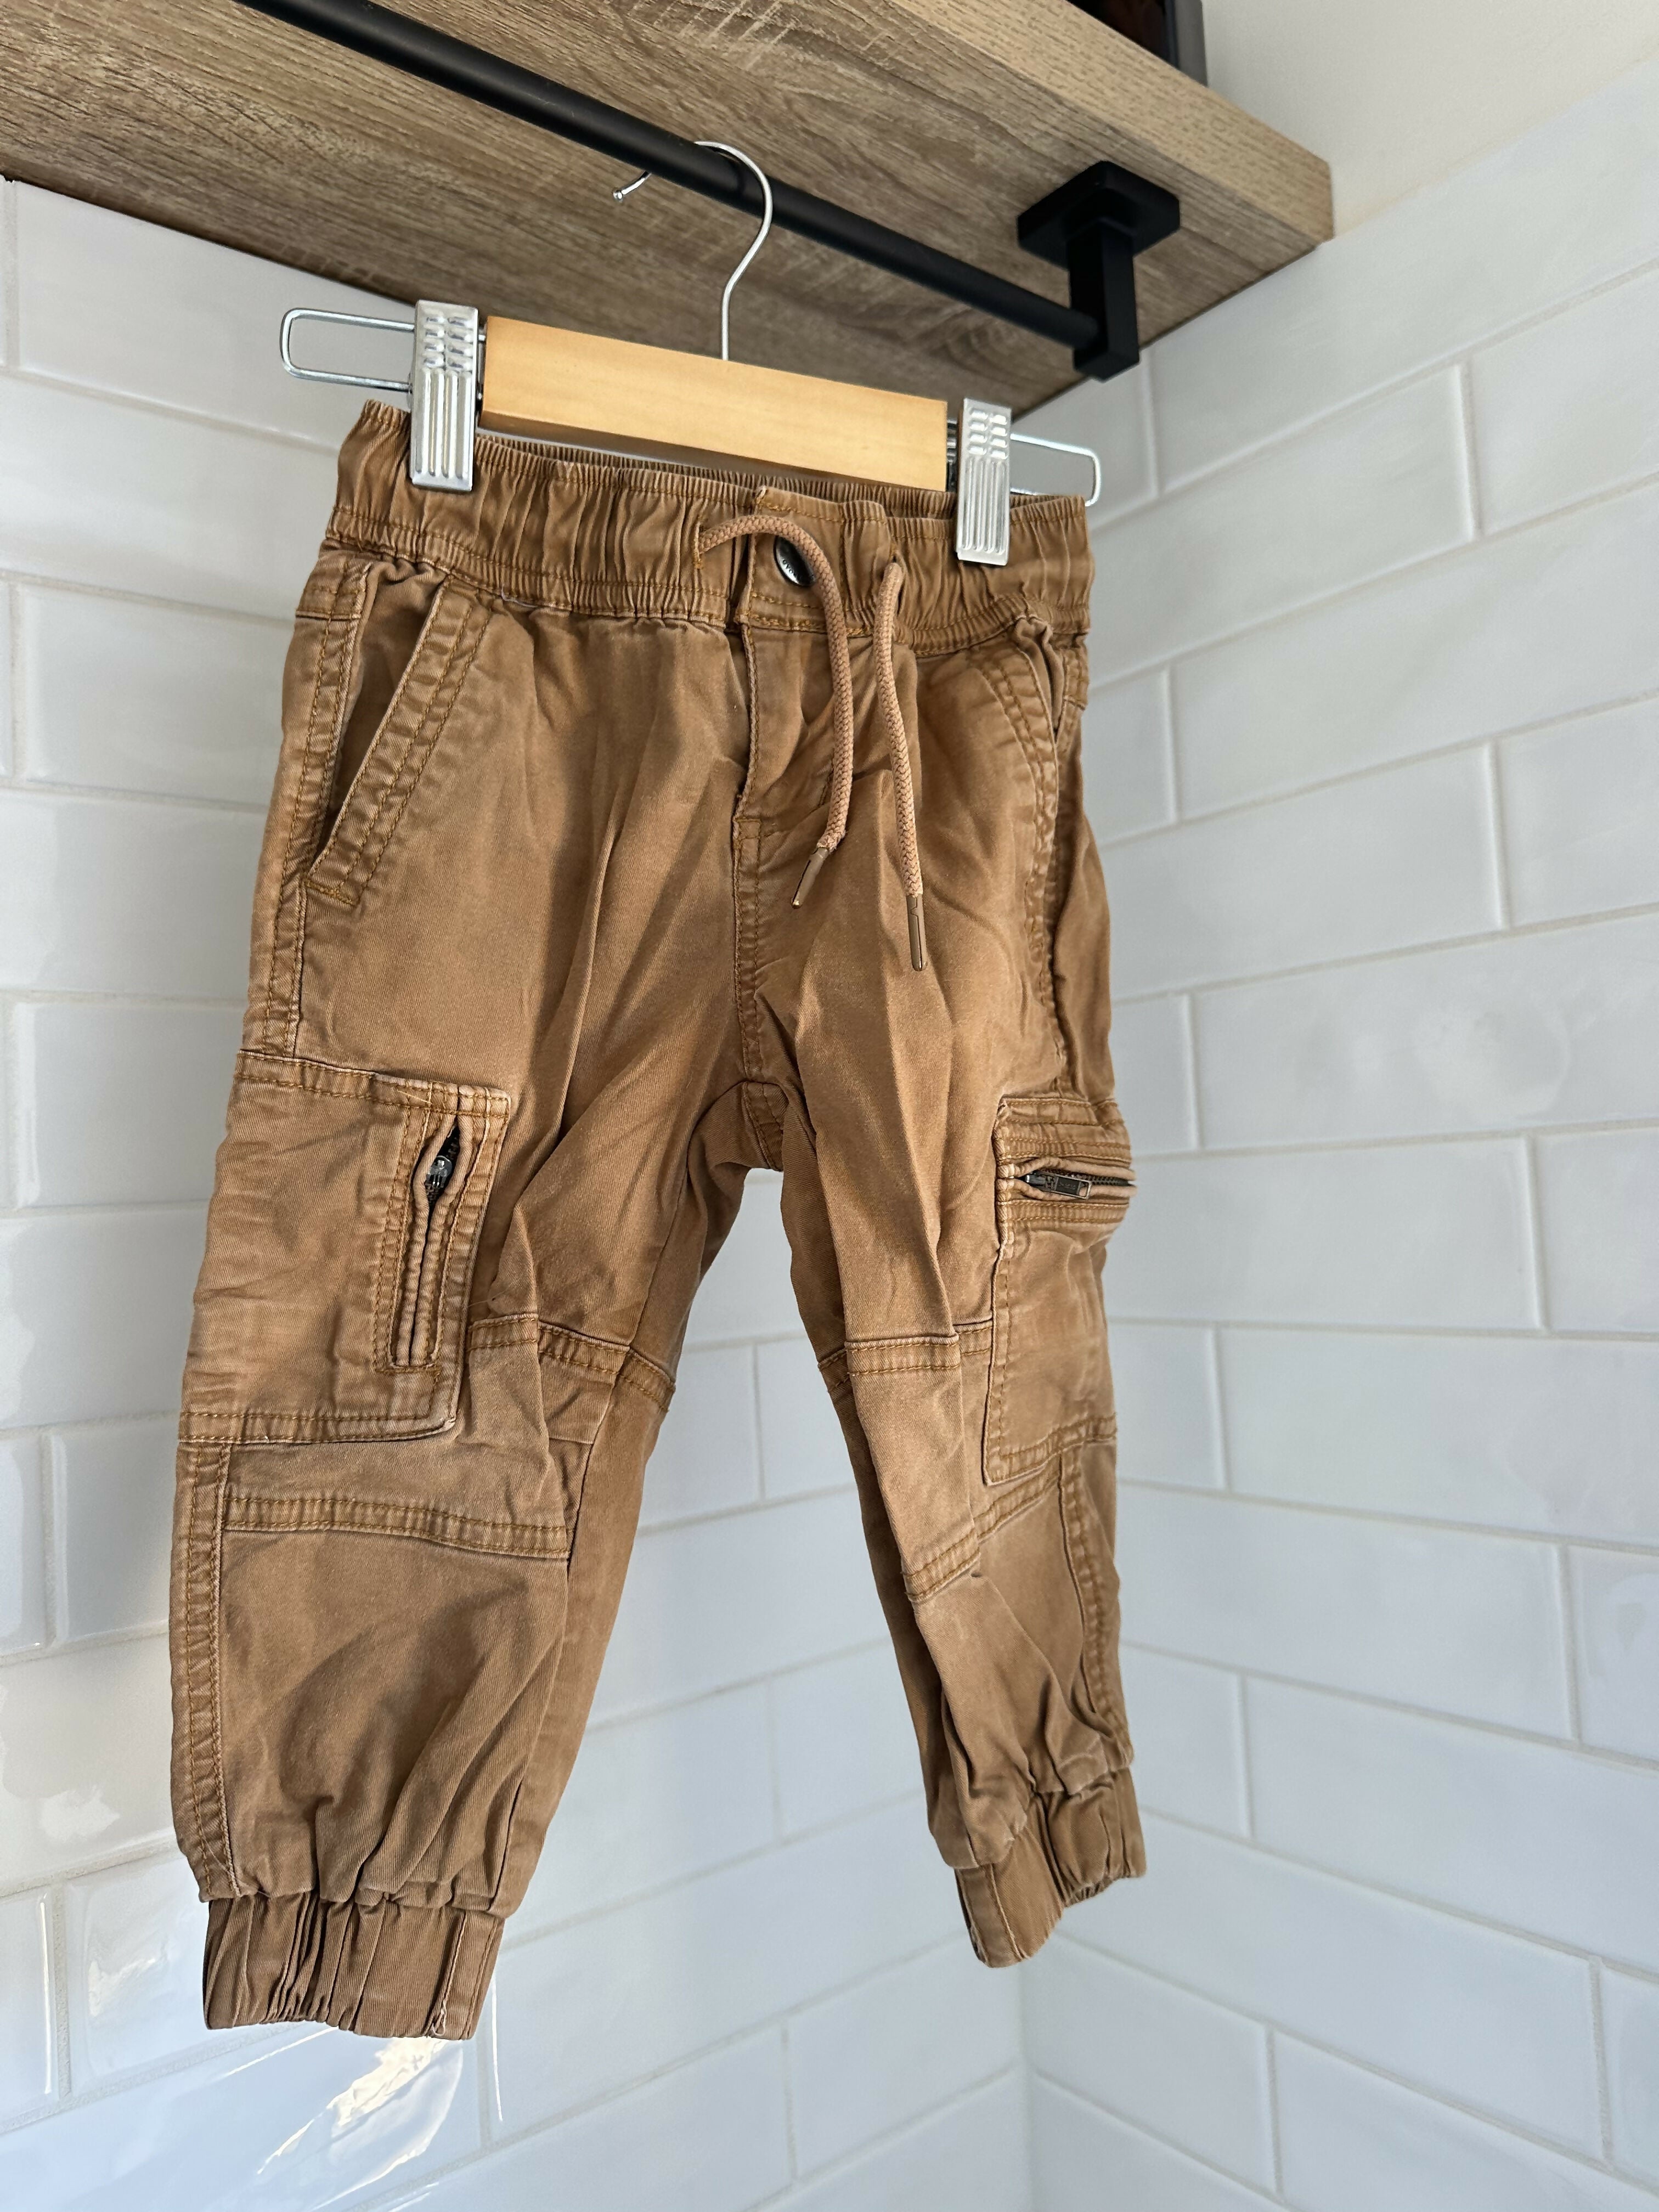 Country Road Cargo Pants (2YR)